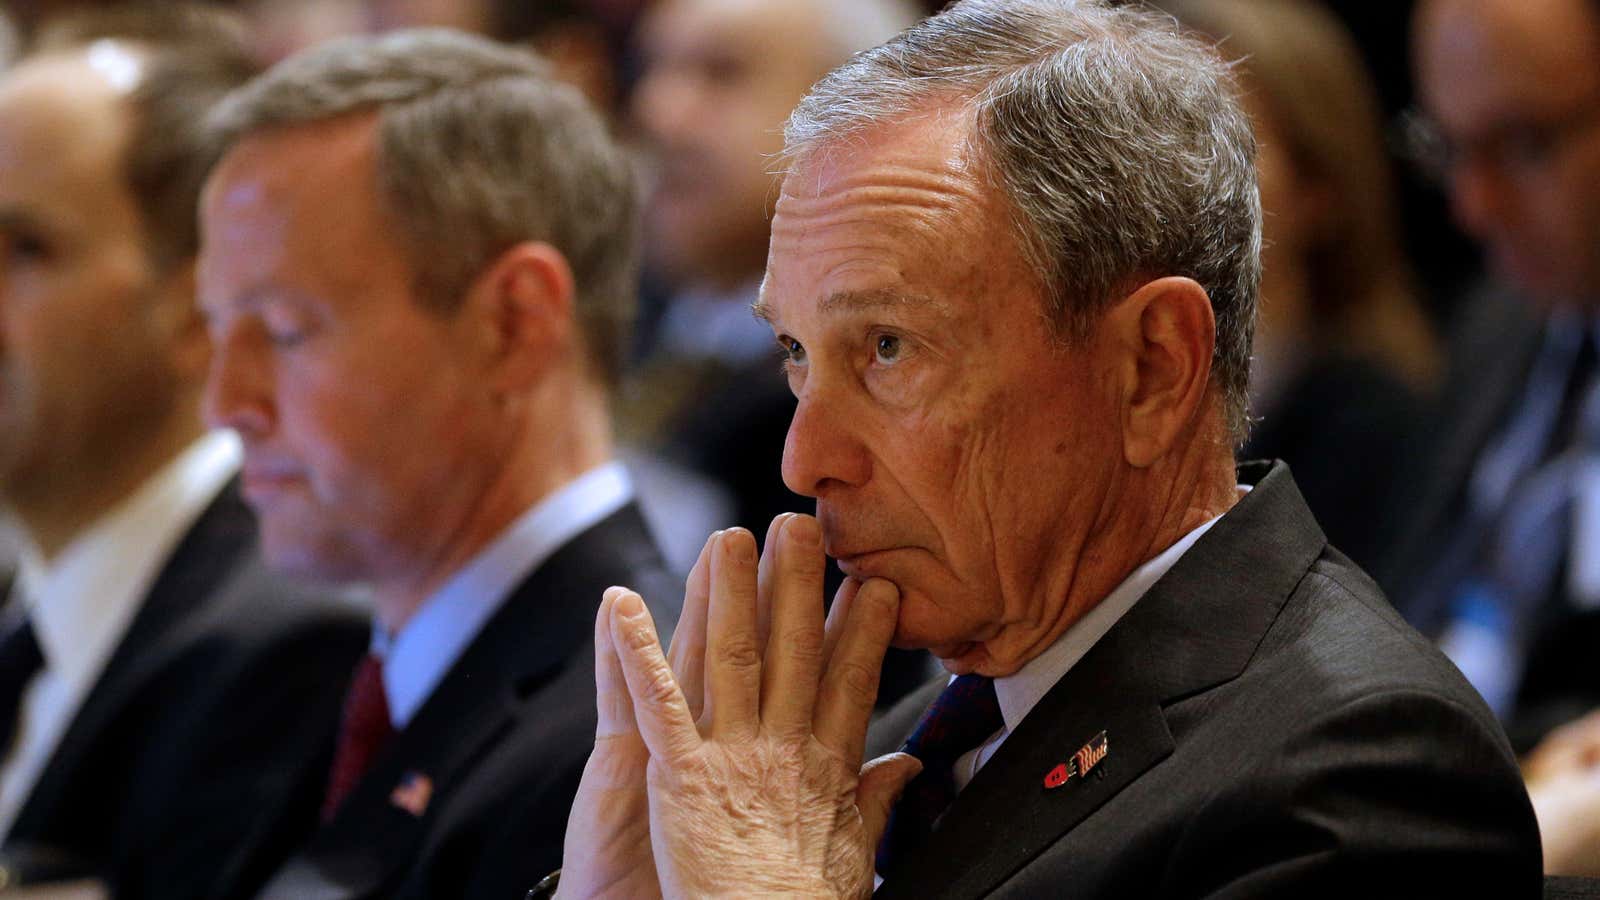 Michael Bloomberg has said that Johns Hopkins “took a chance” on him.